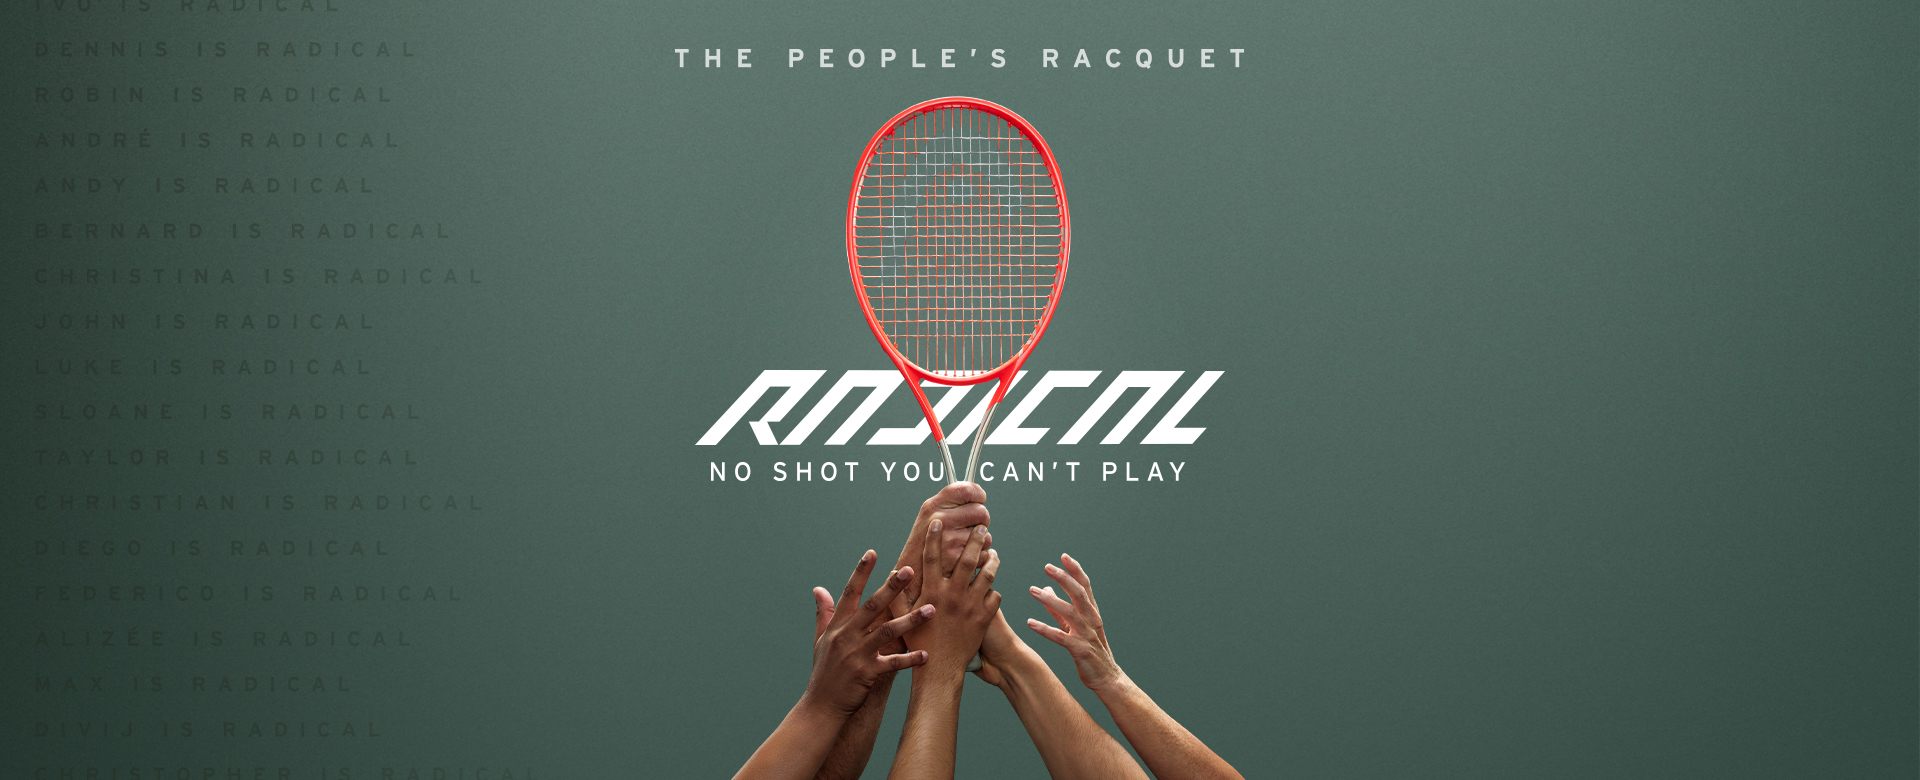 The New Head Radical – No shot you can’t play